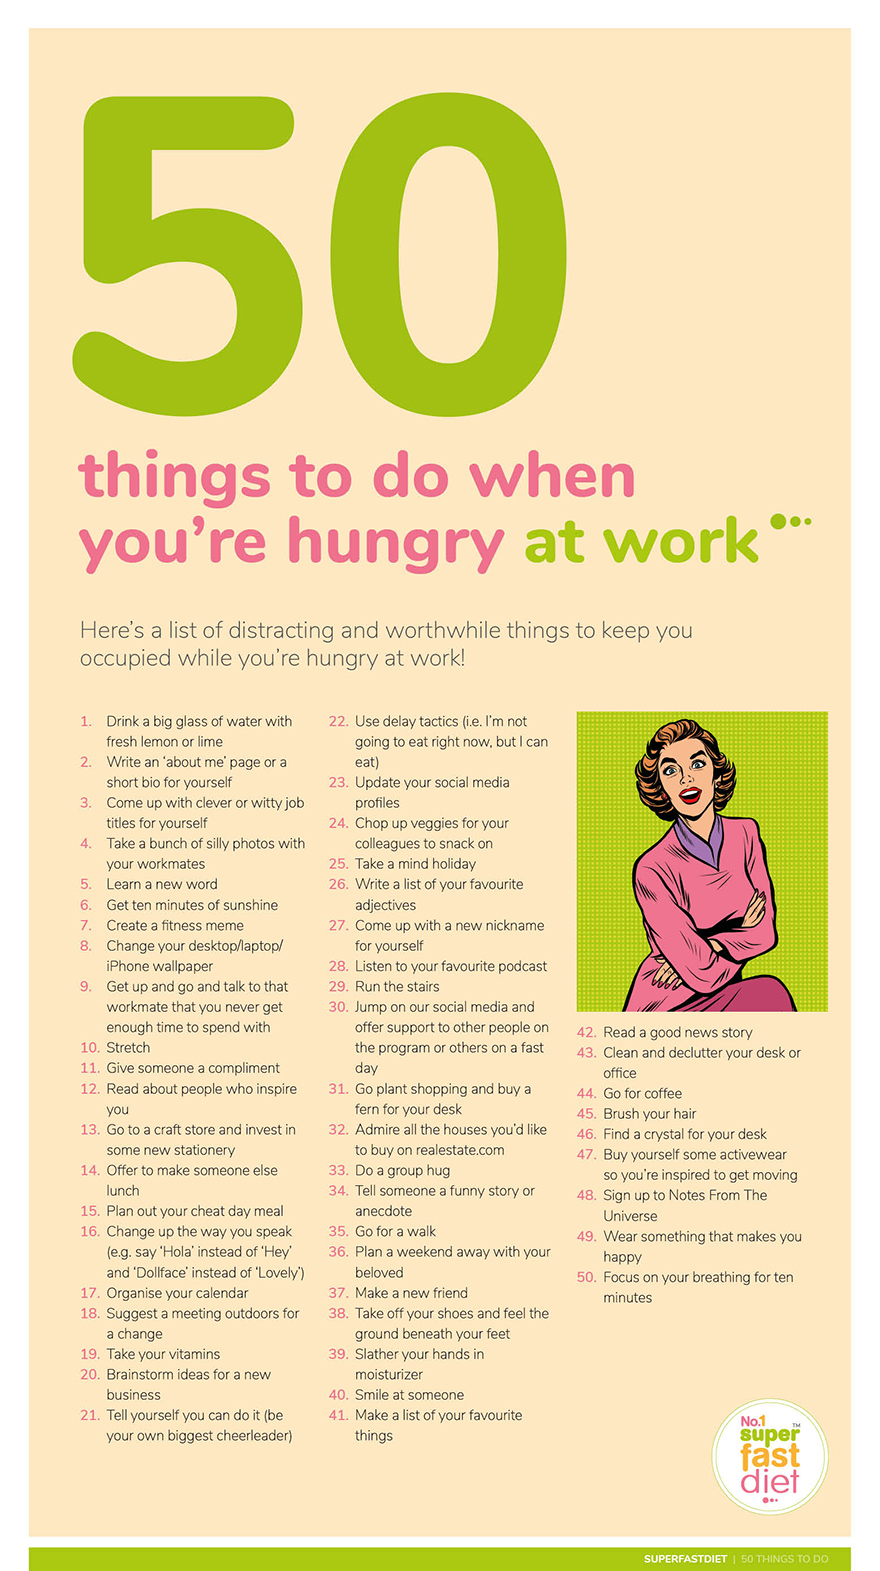 SuperFastDiet-50-Things-To-Do-When-Hungry-at-Work